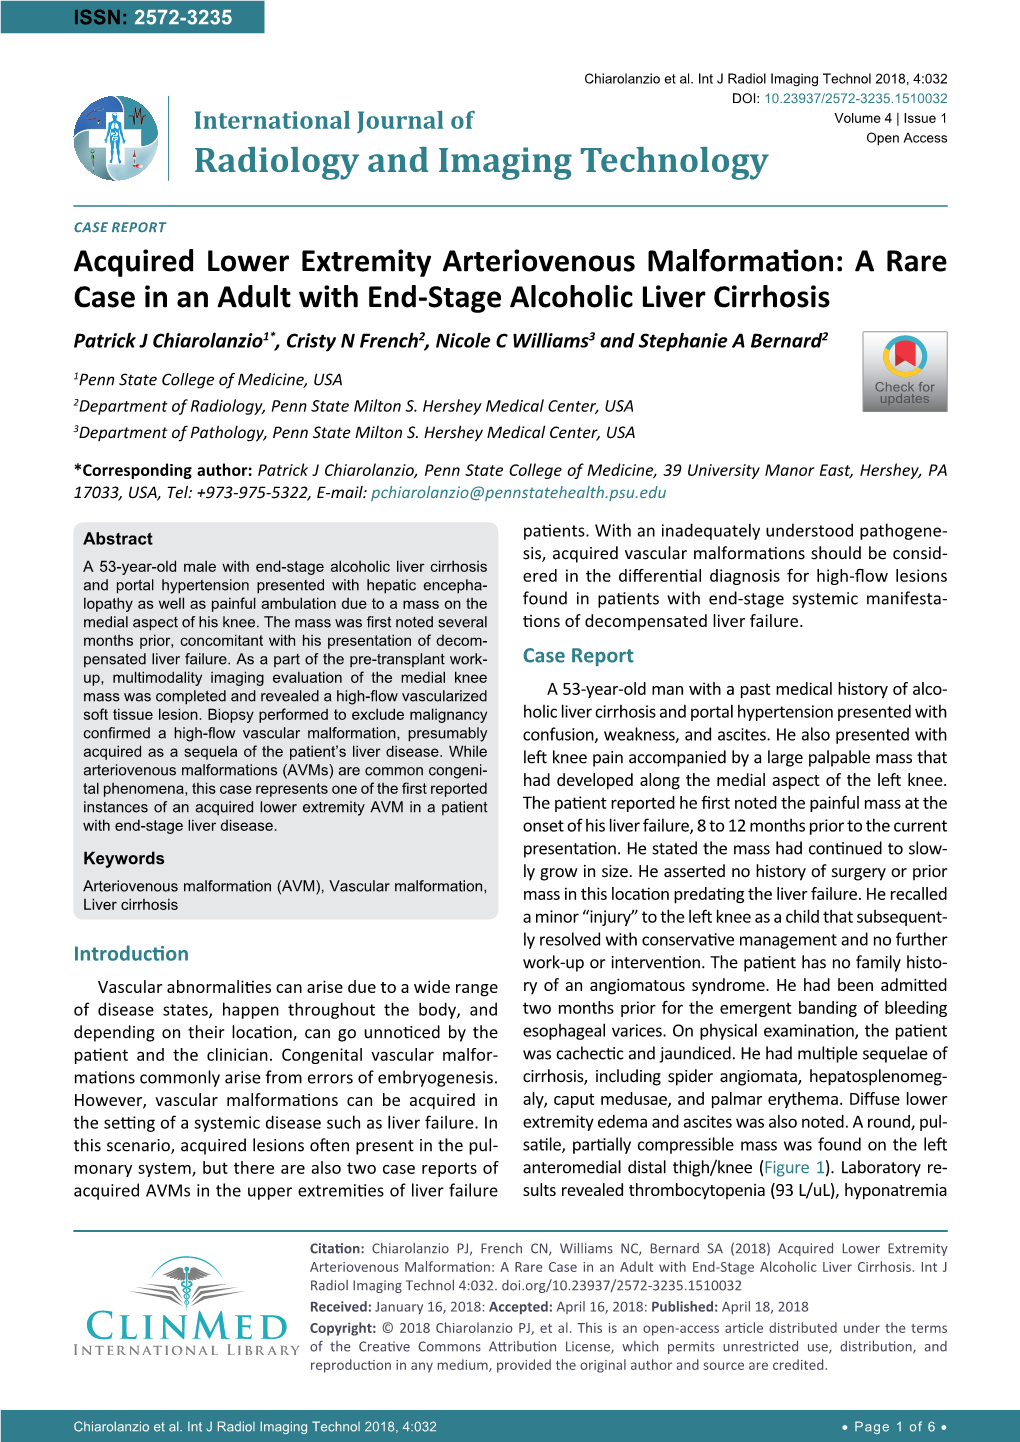 Acquired Lower Extremity Arteriovenous Malformation: a Rare